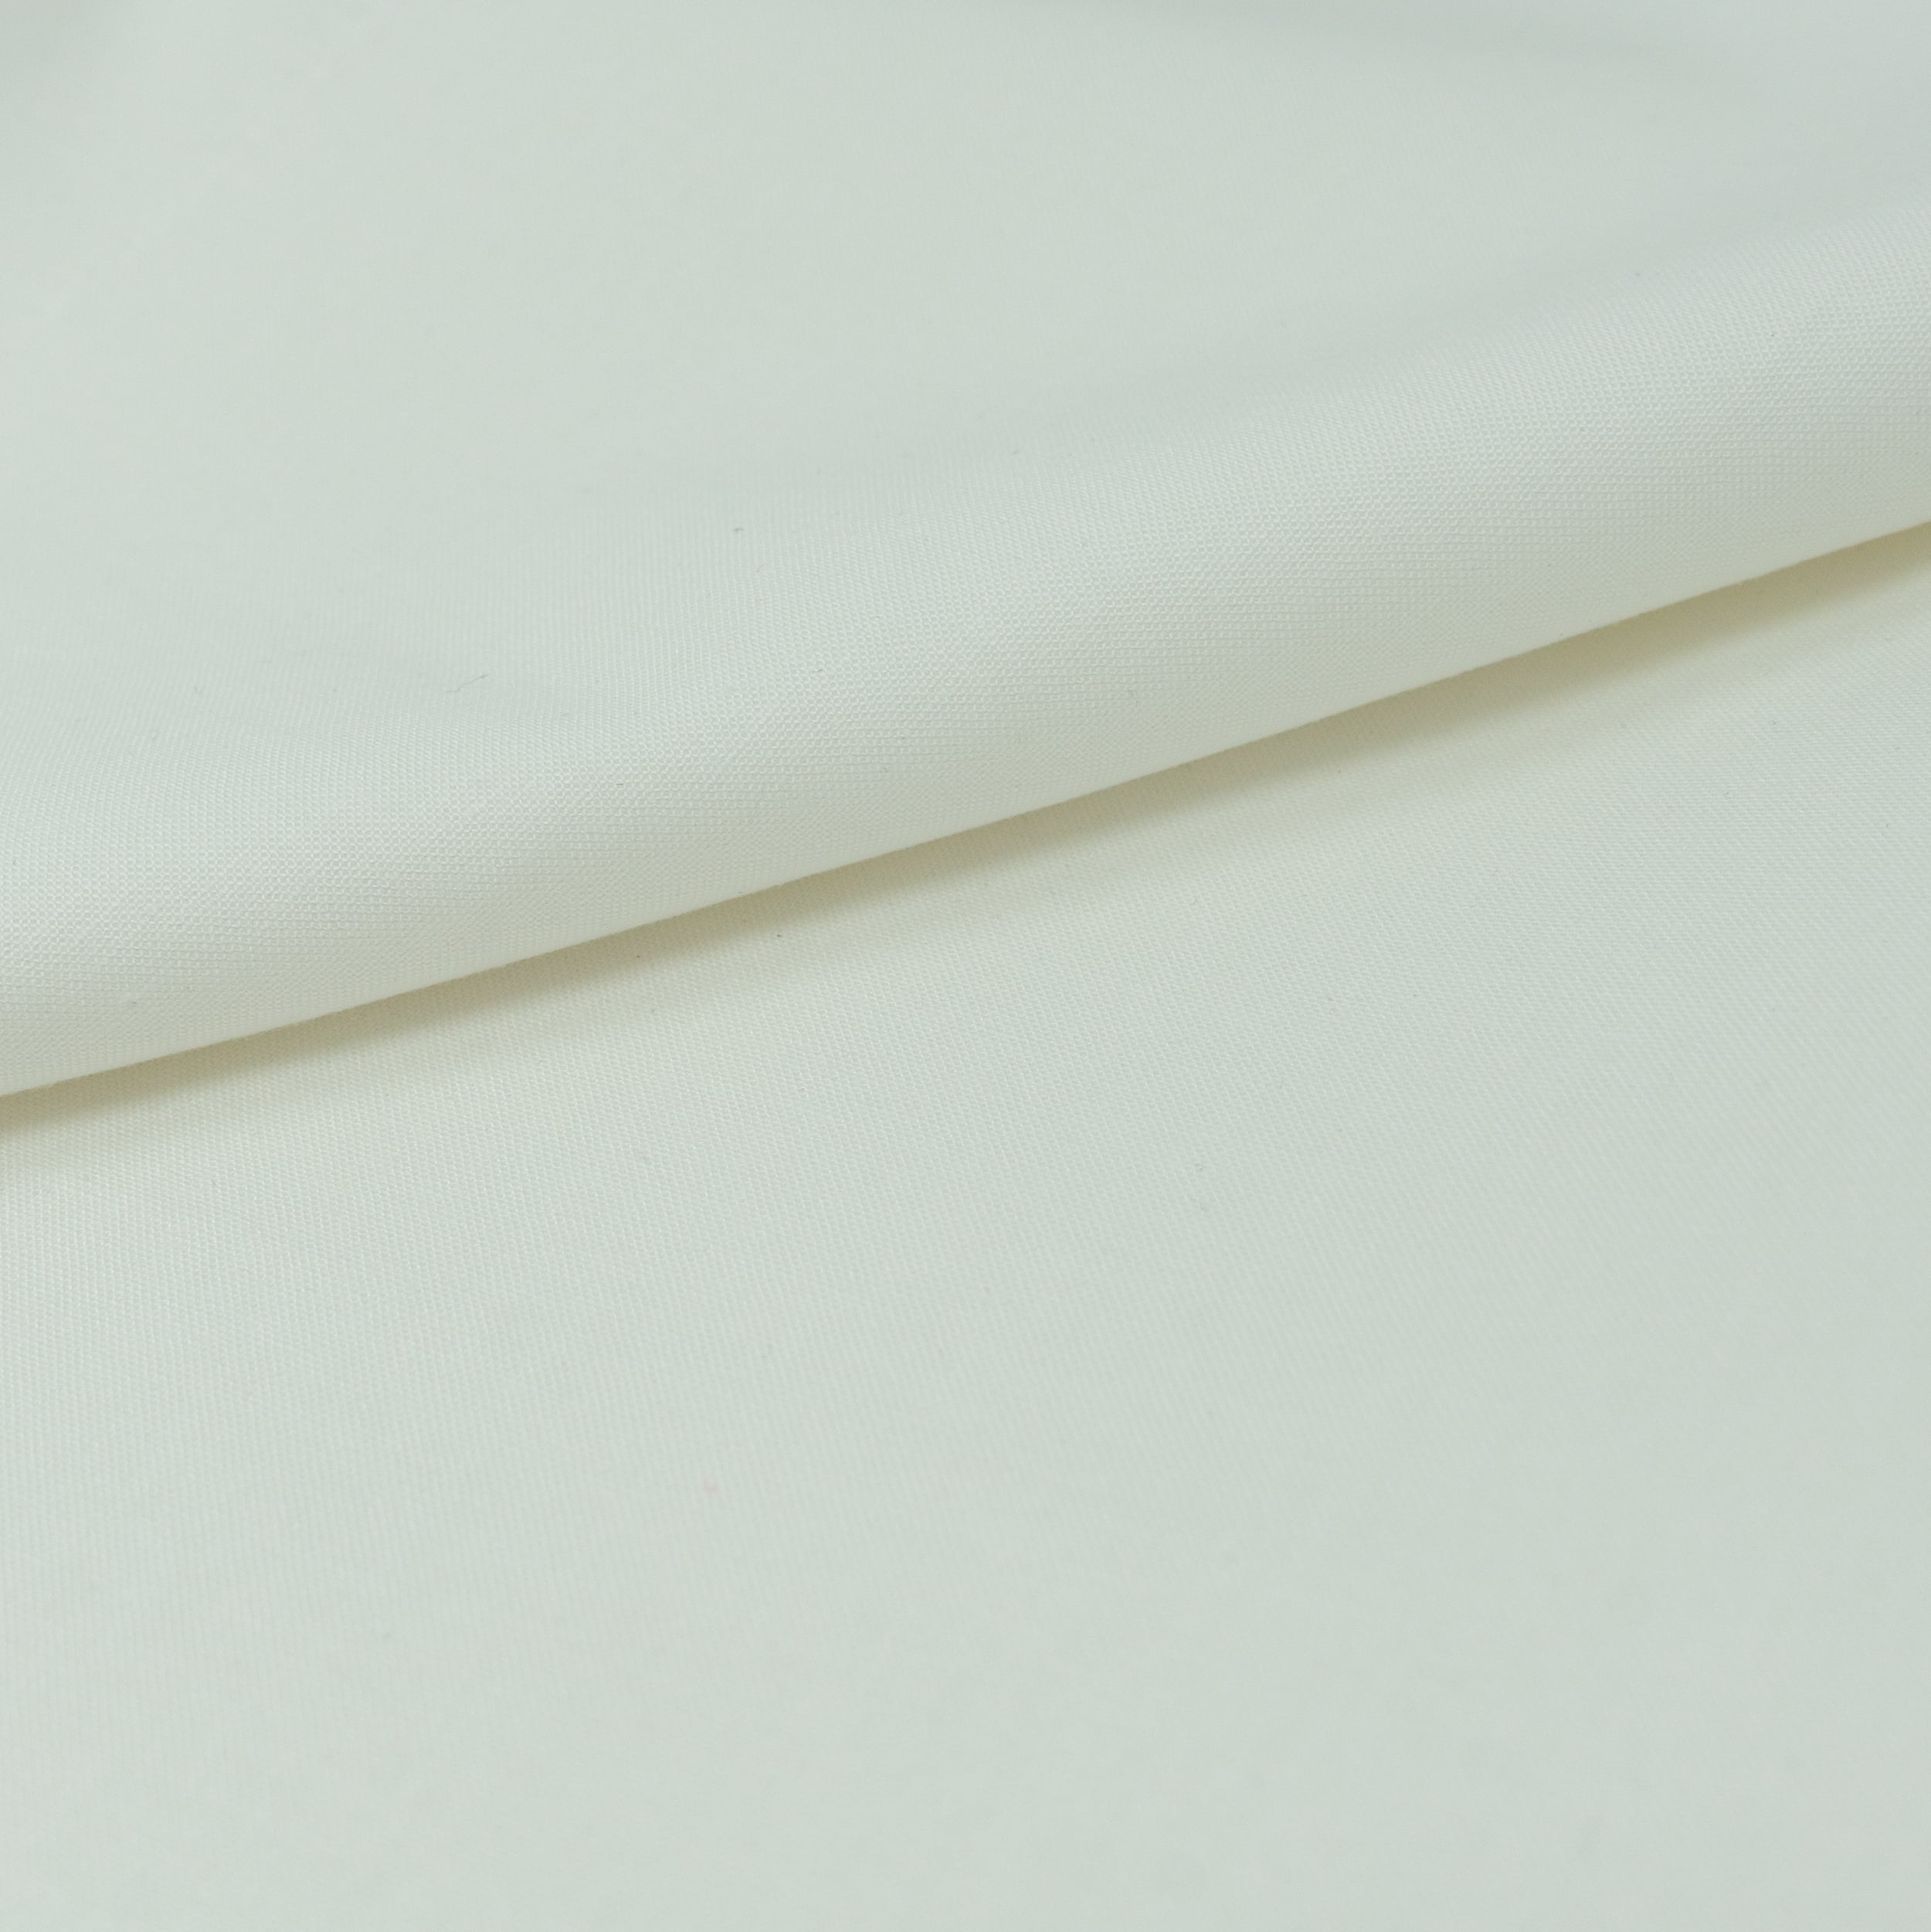 Singer Fabrics - 100% Cotton, Craft Quilting, 44 inch x 8 Yards Cut, by Bolt, Solid Bright White, Precut Fabric, Size: 8 Yards(Large) x 44(W)